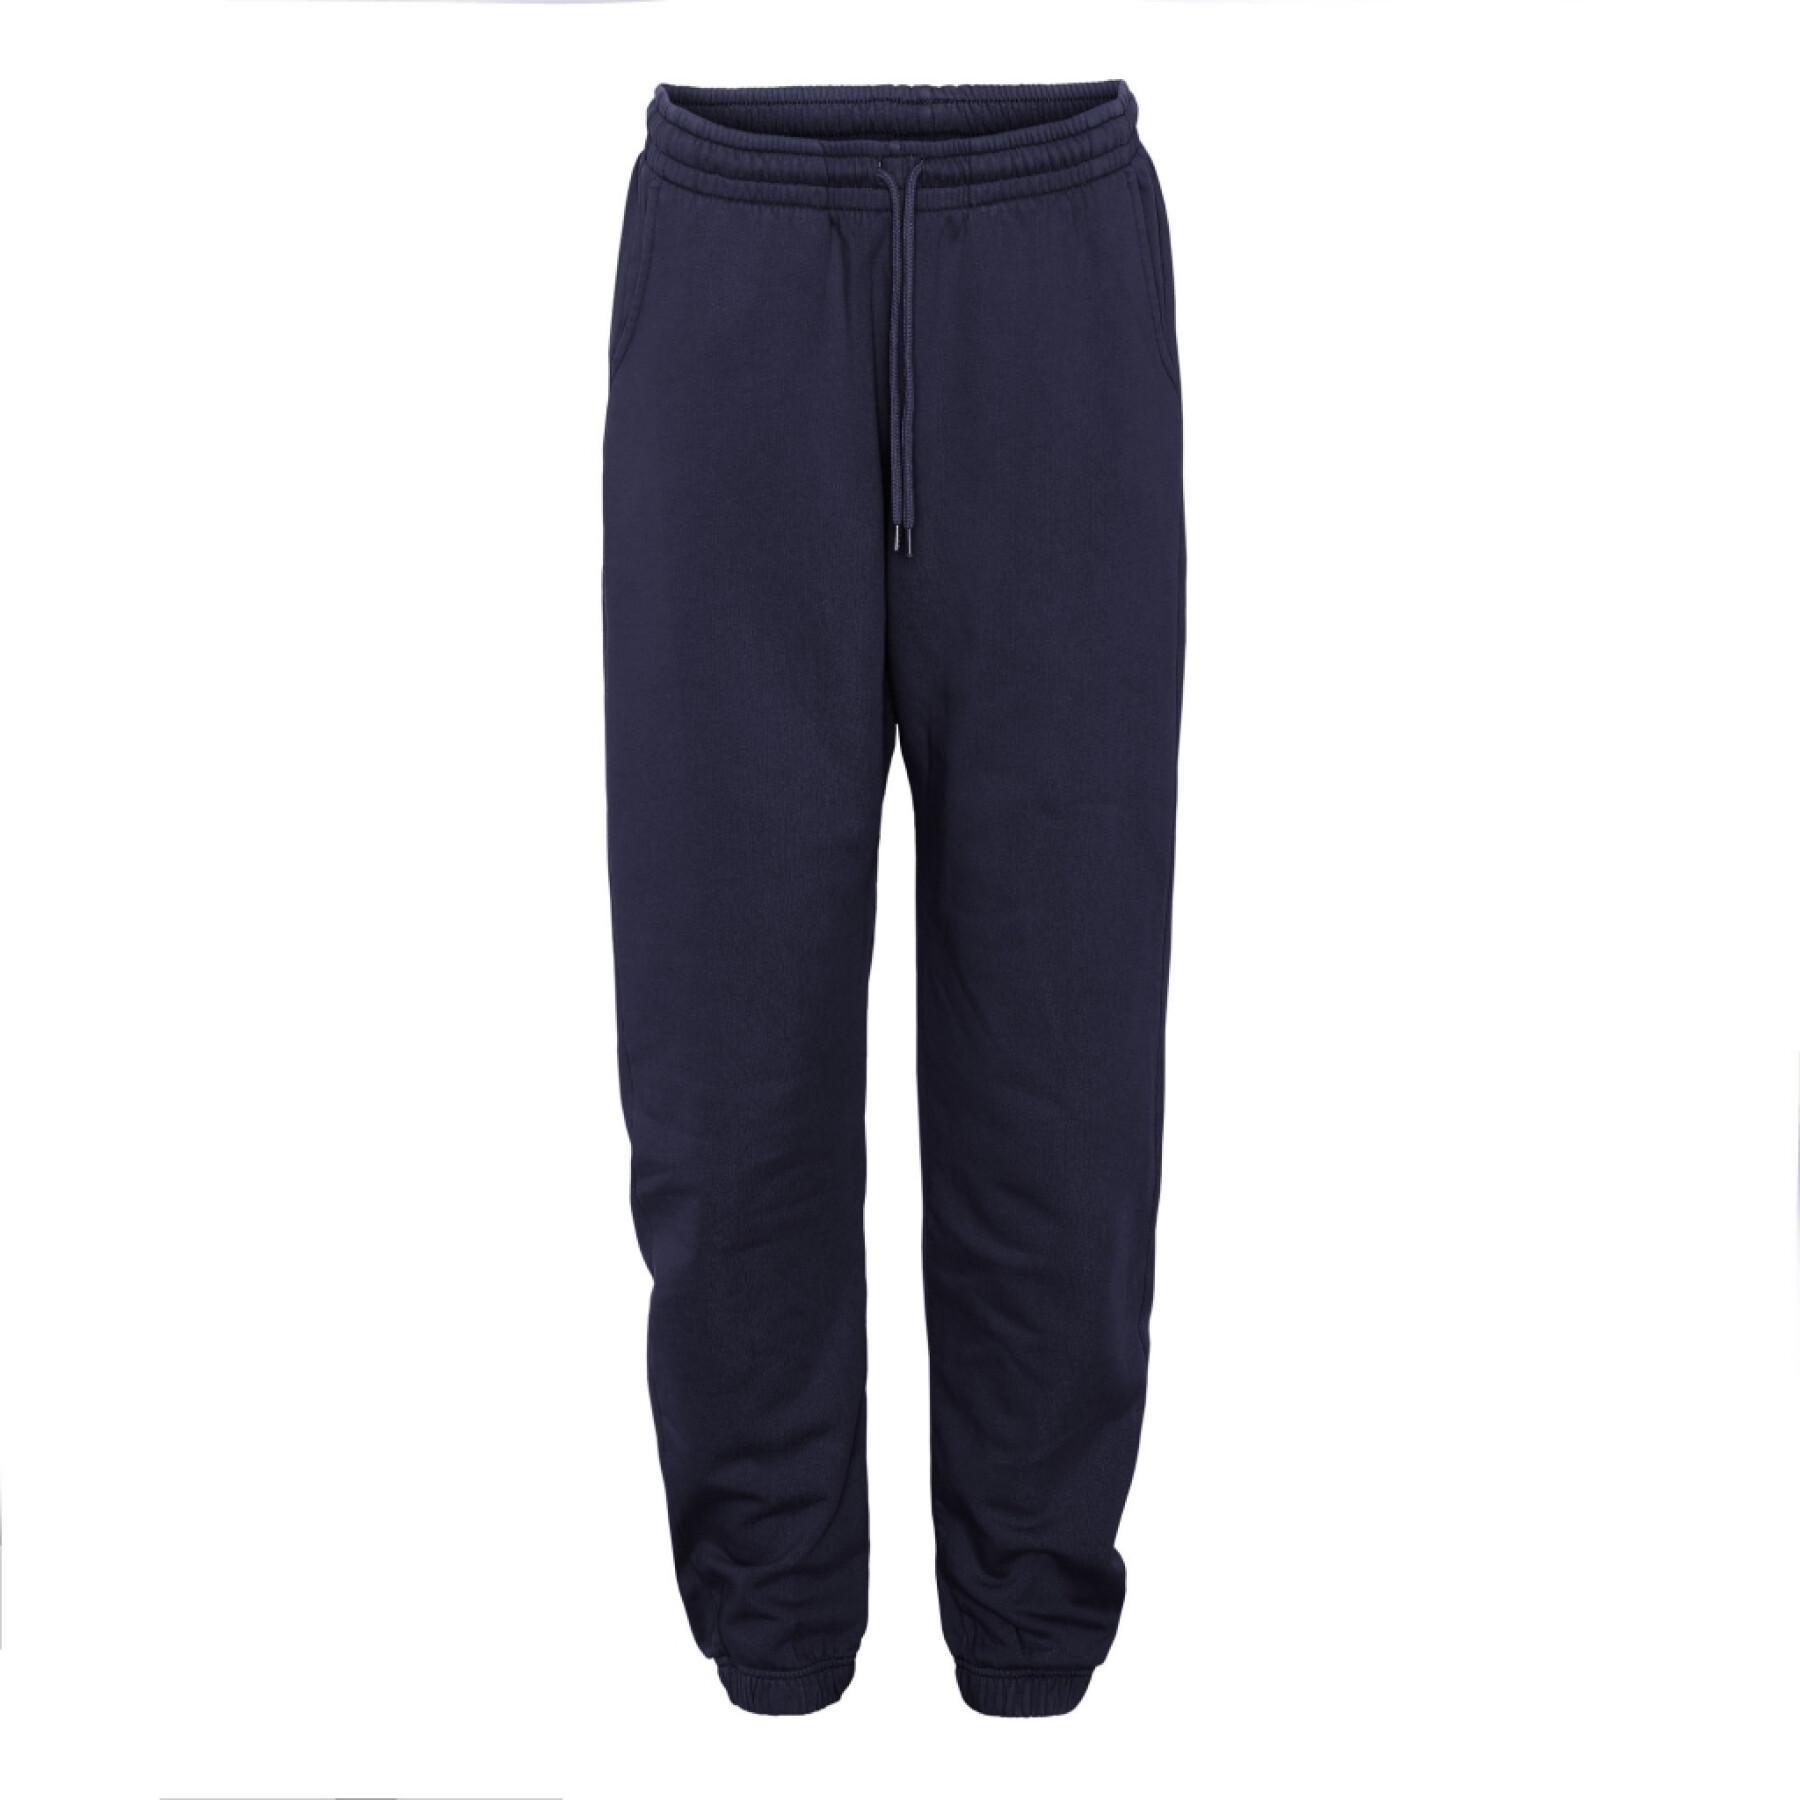 Joggers Colorful Standard Organic navy blue